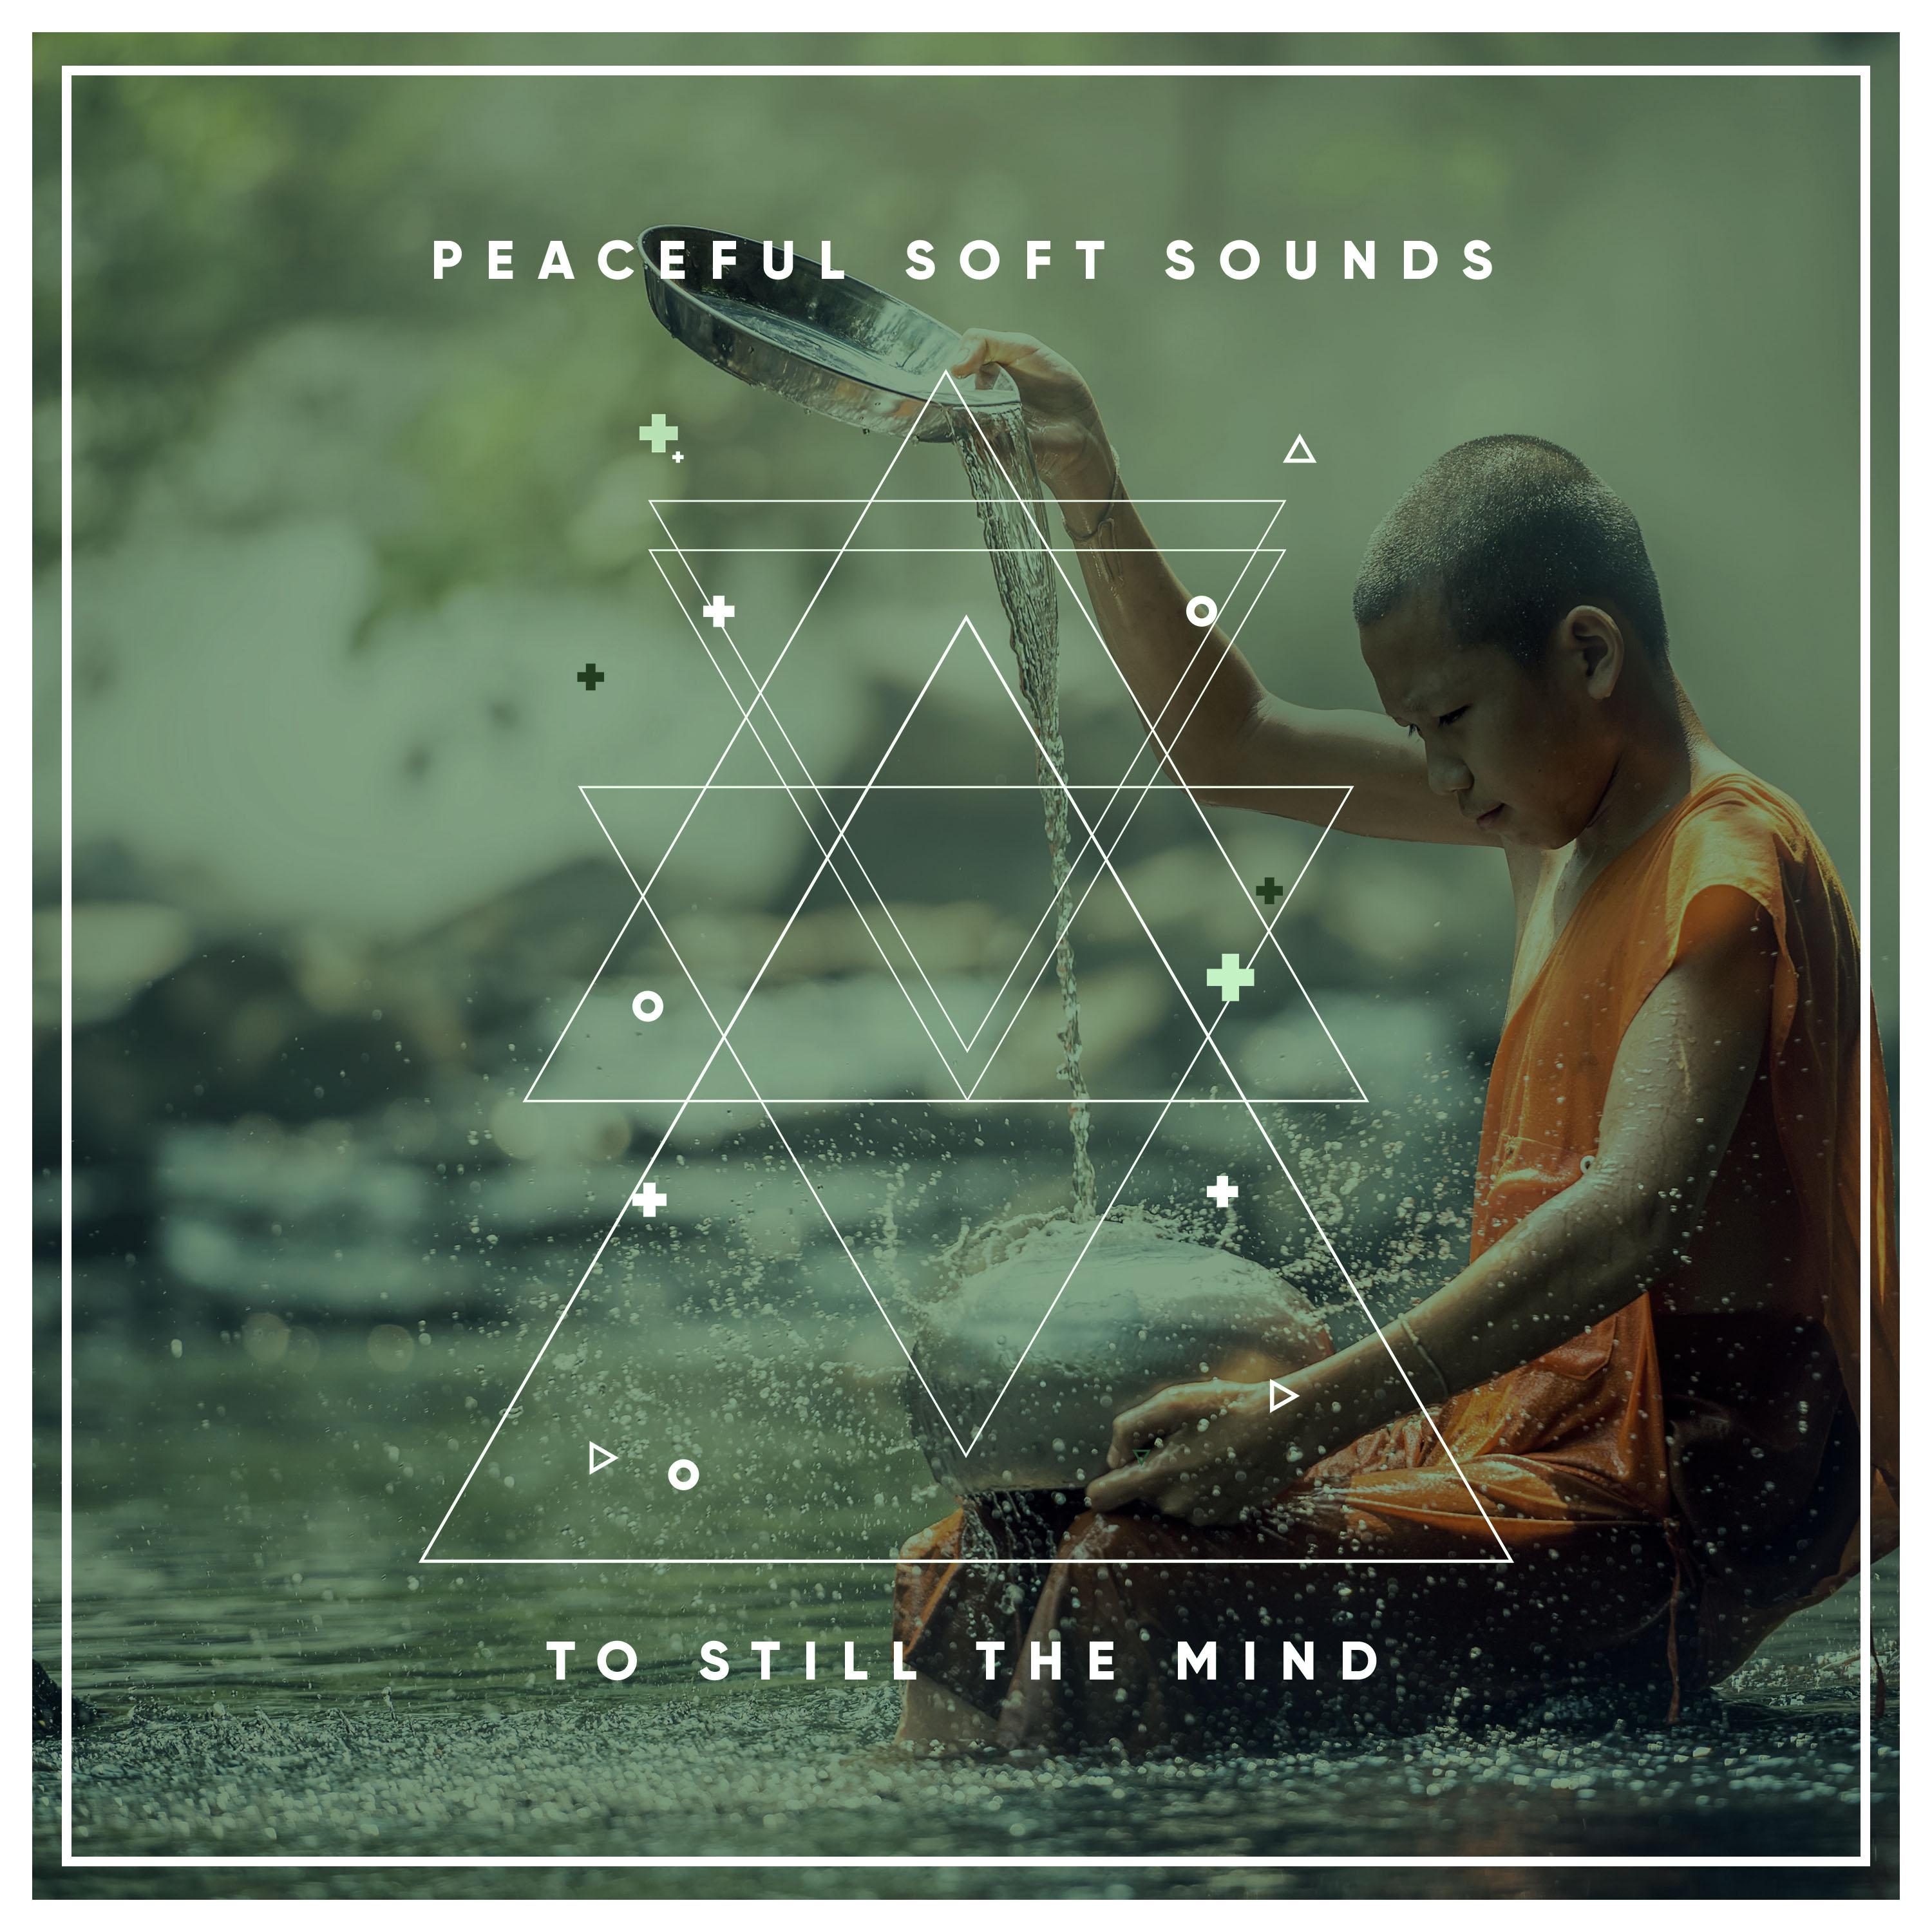 12 Peaceful Soft Sounds to Still the Mind